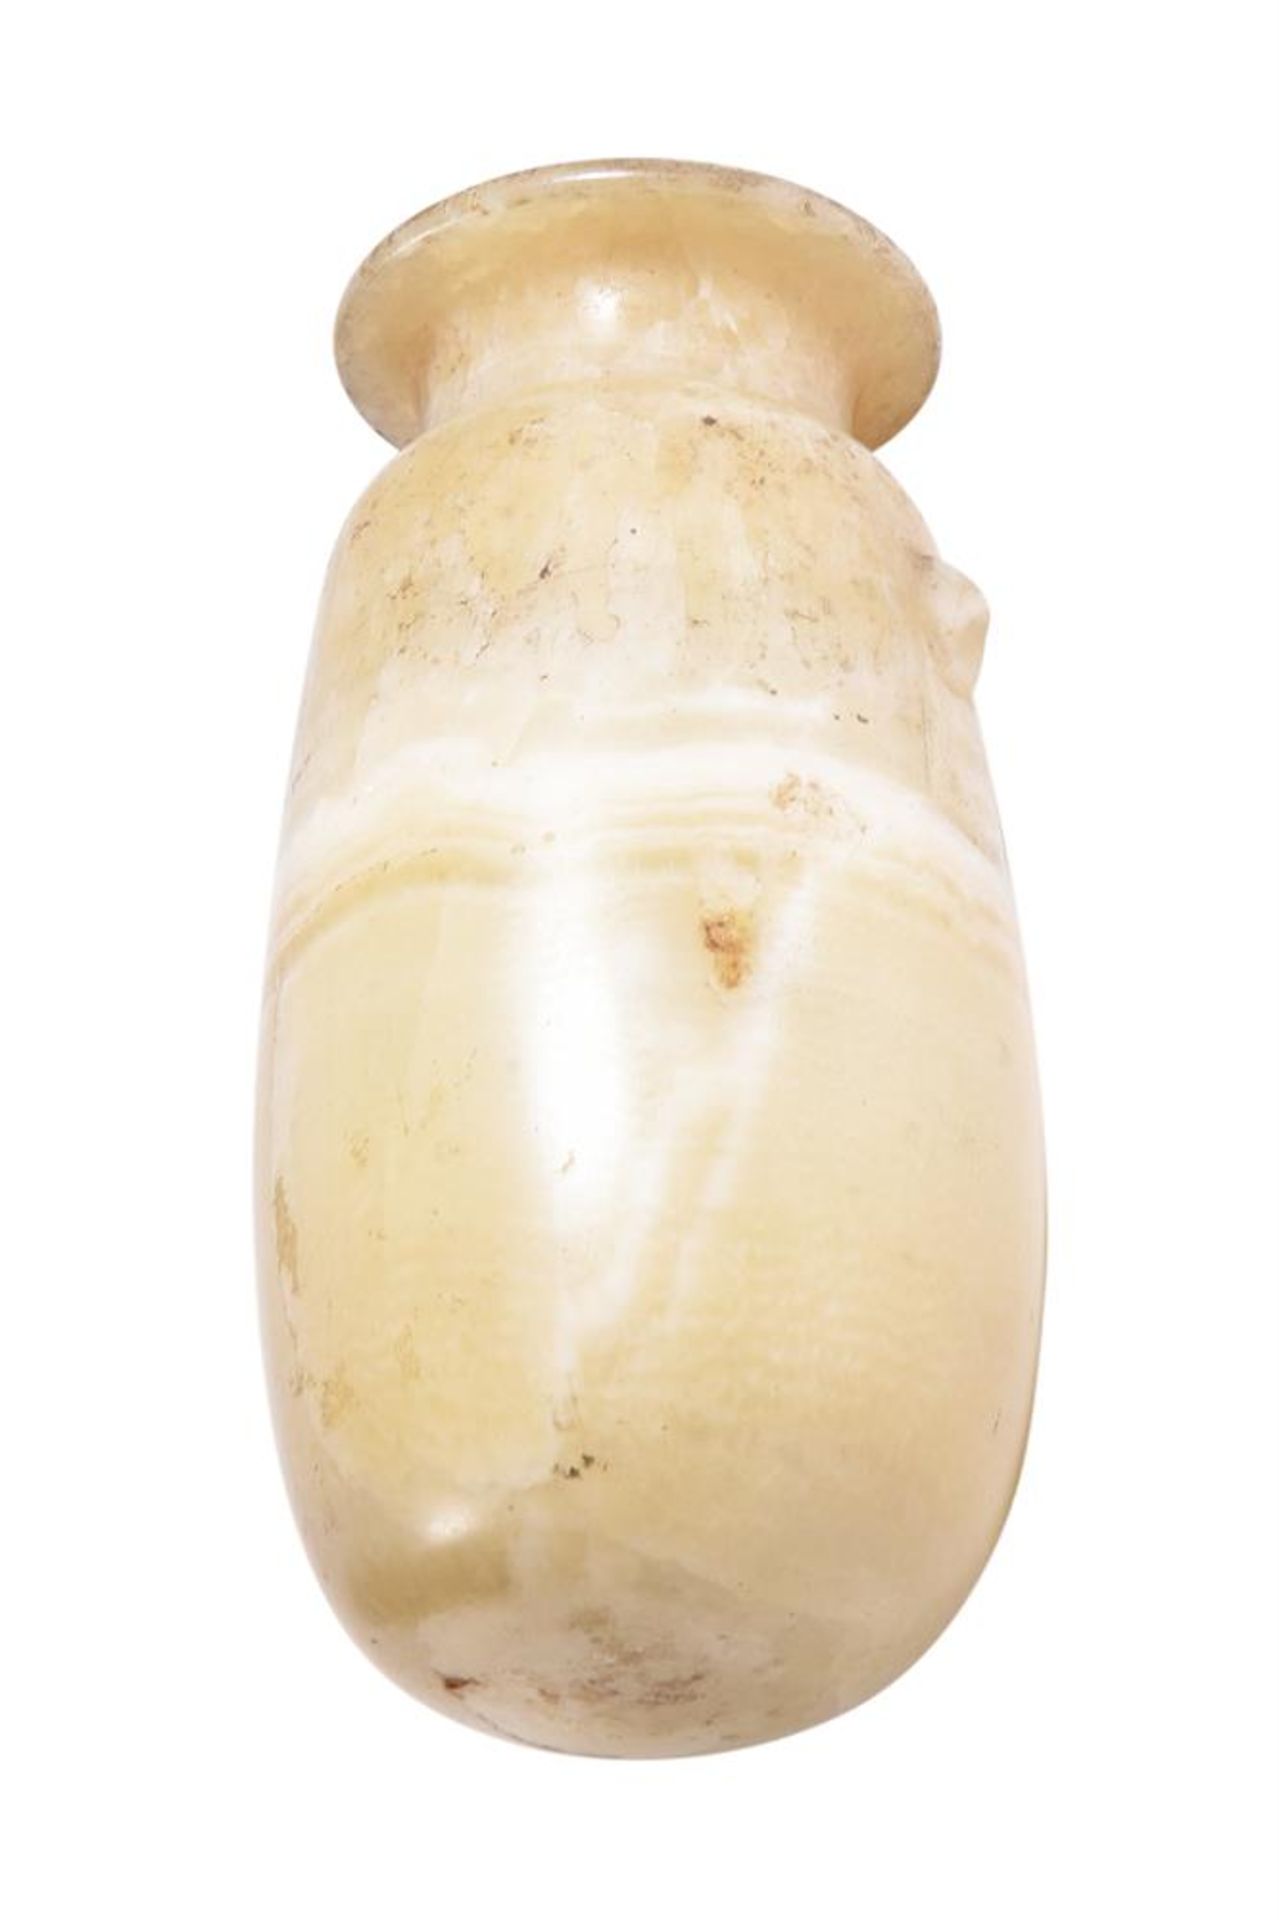 AN EGYPTIAN ALABASTER ALABASTRON, LATE PERIOD AFTER 600 B.C. - Image 2 of 3